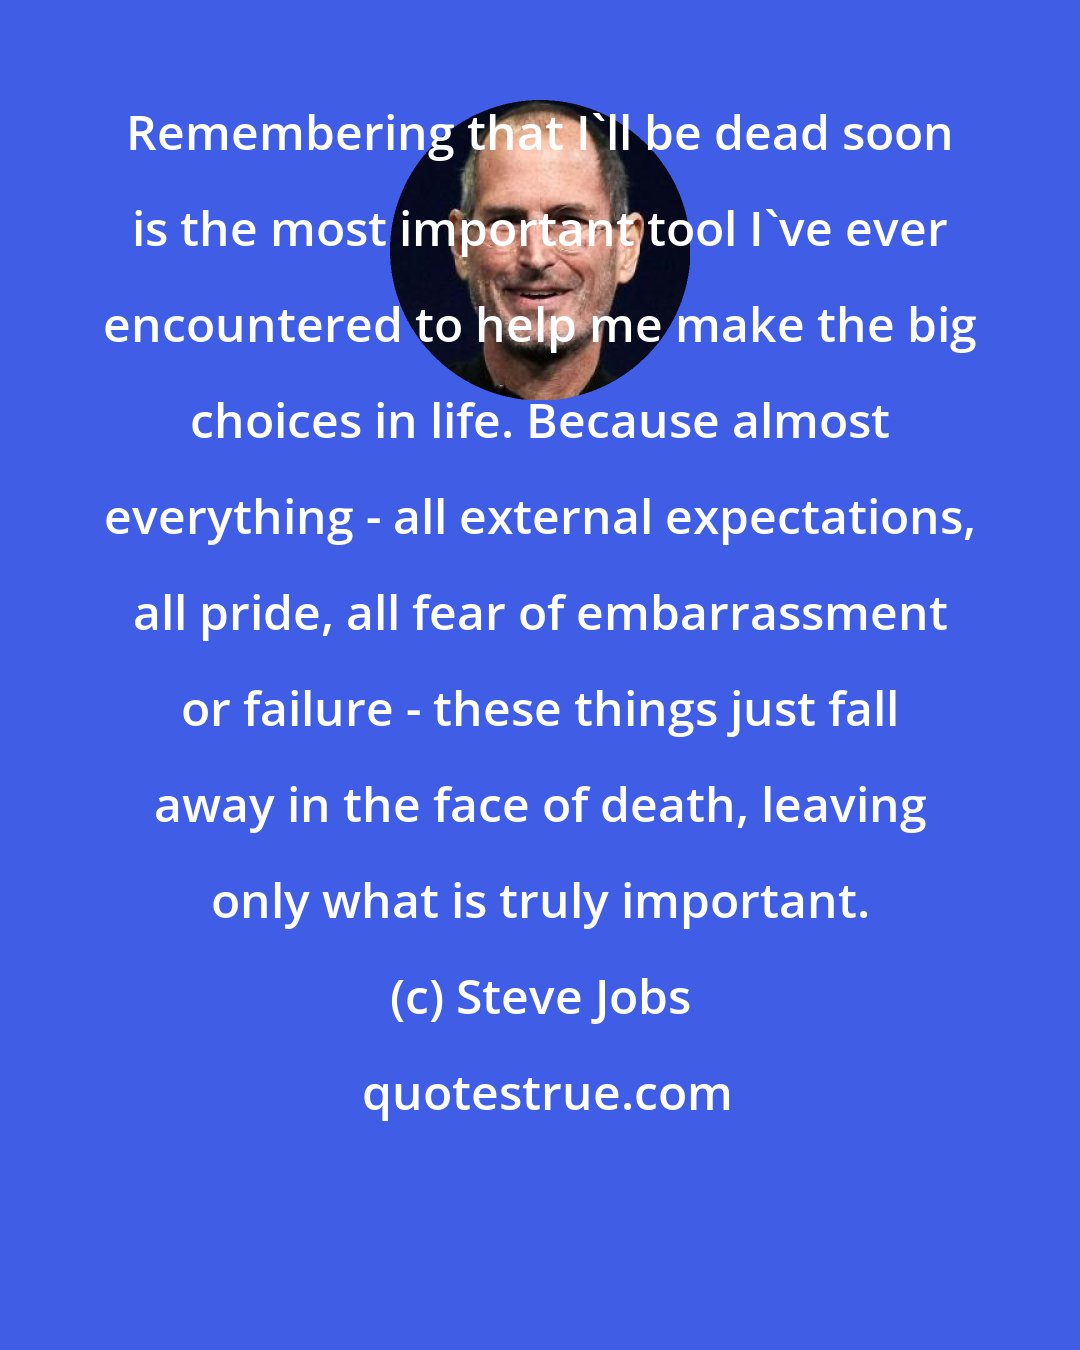 Steve Jobs: Remembering that I'll be dead soon is the most important tool I've ever encountered to help me make the big choices in life. Because almost everything - all external expectations, all pride, all fear of embarrassment or failure - these things just fall away in the face of death, leaving only what is truly important.